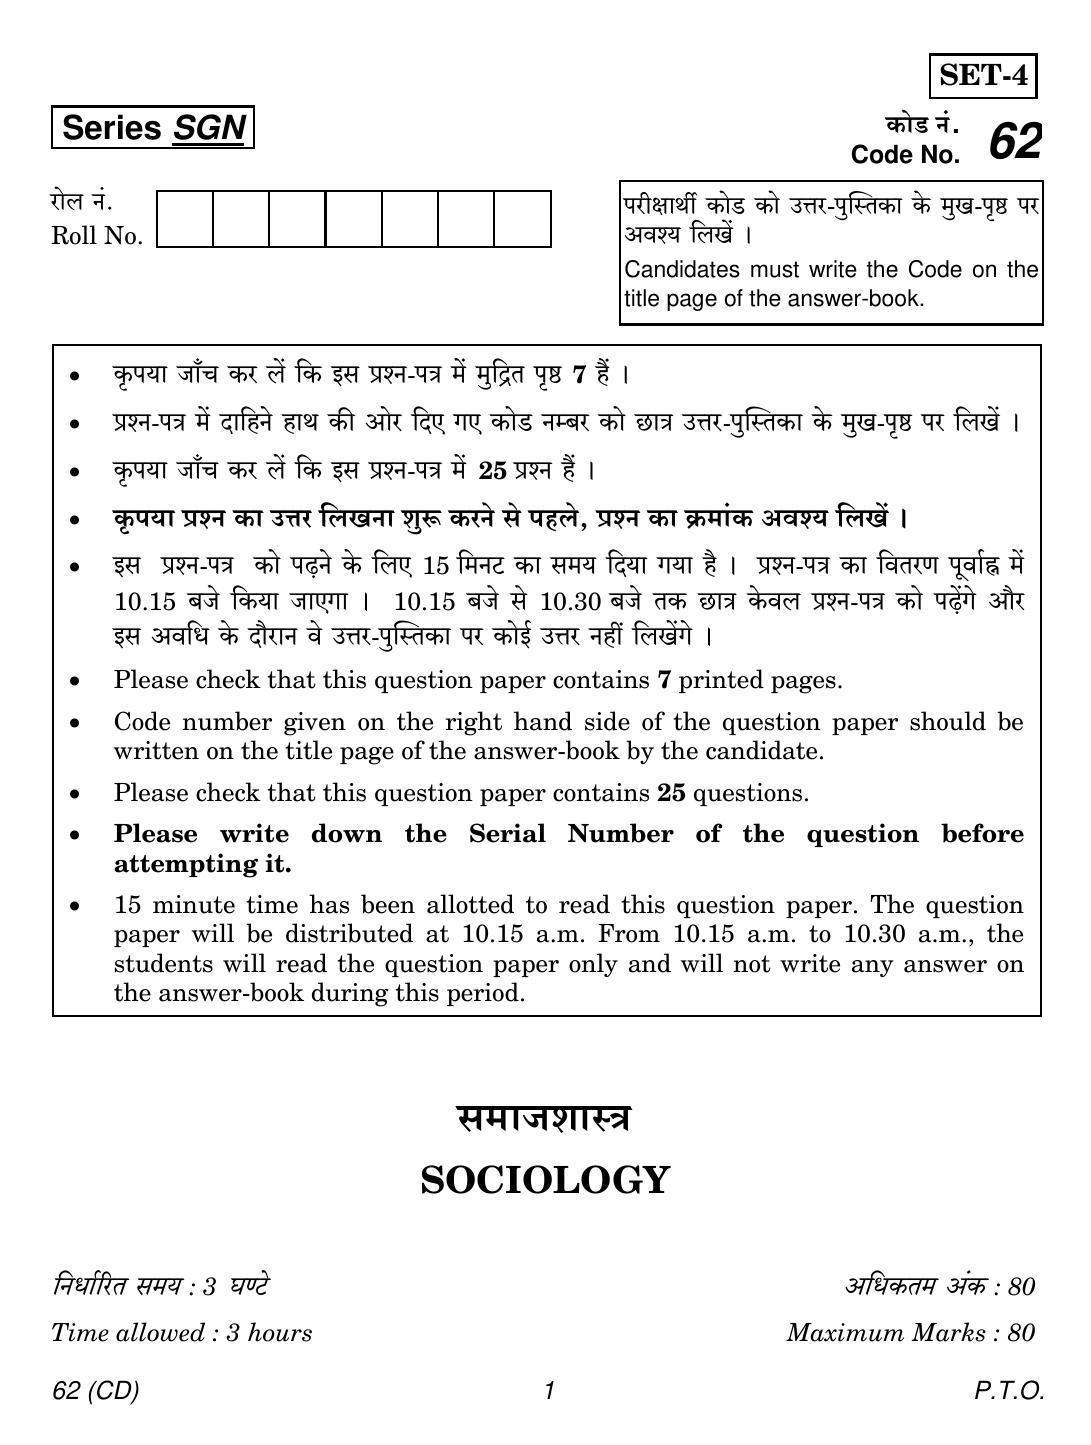 CBSE Class 12 62 SOCIOLOGY CD 2018 Question Paper - Page 1